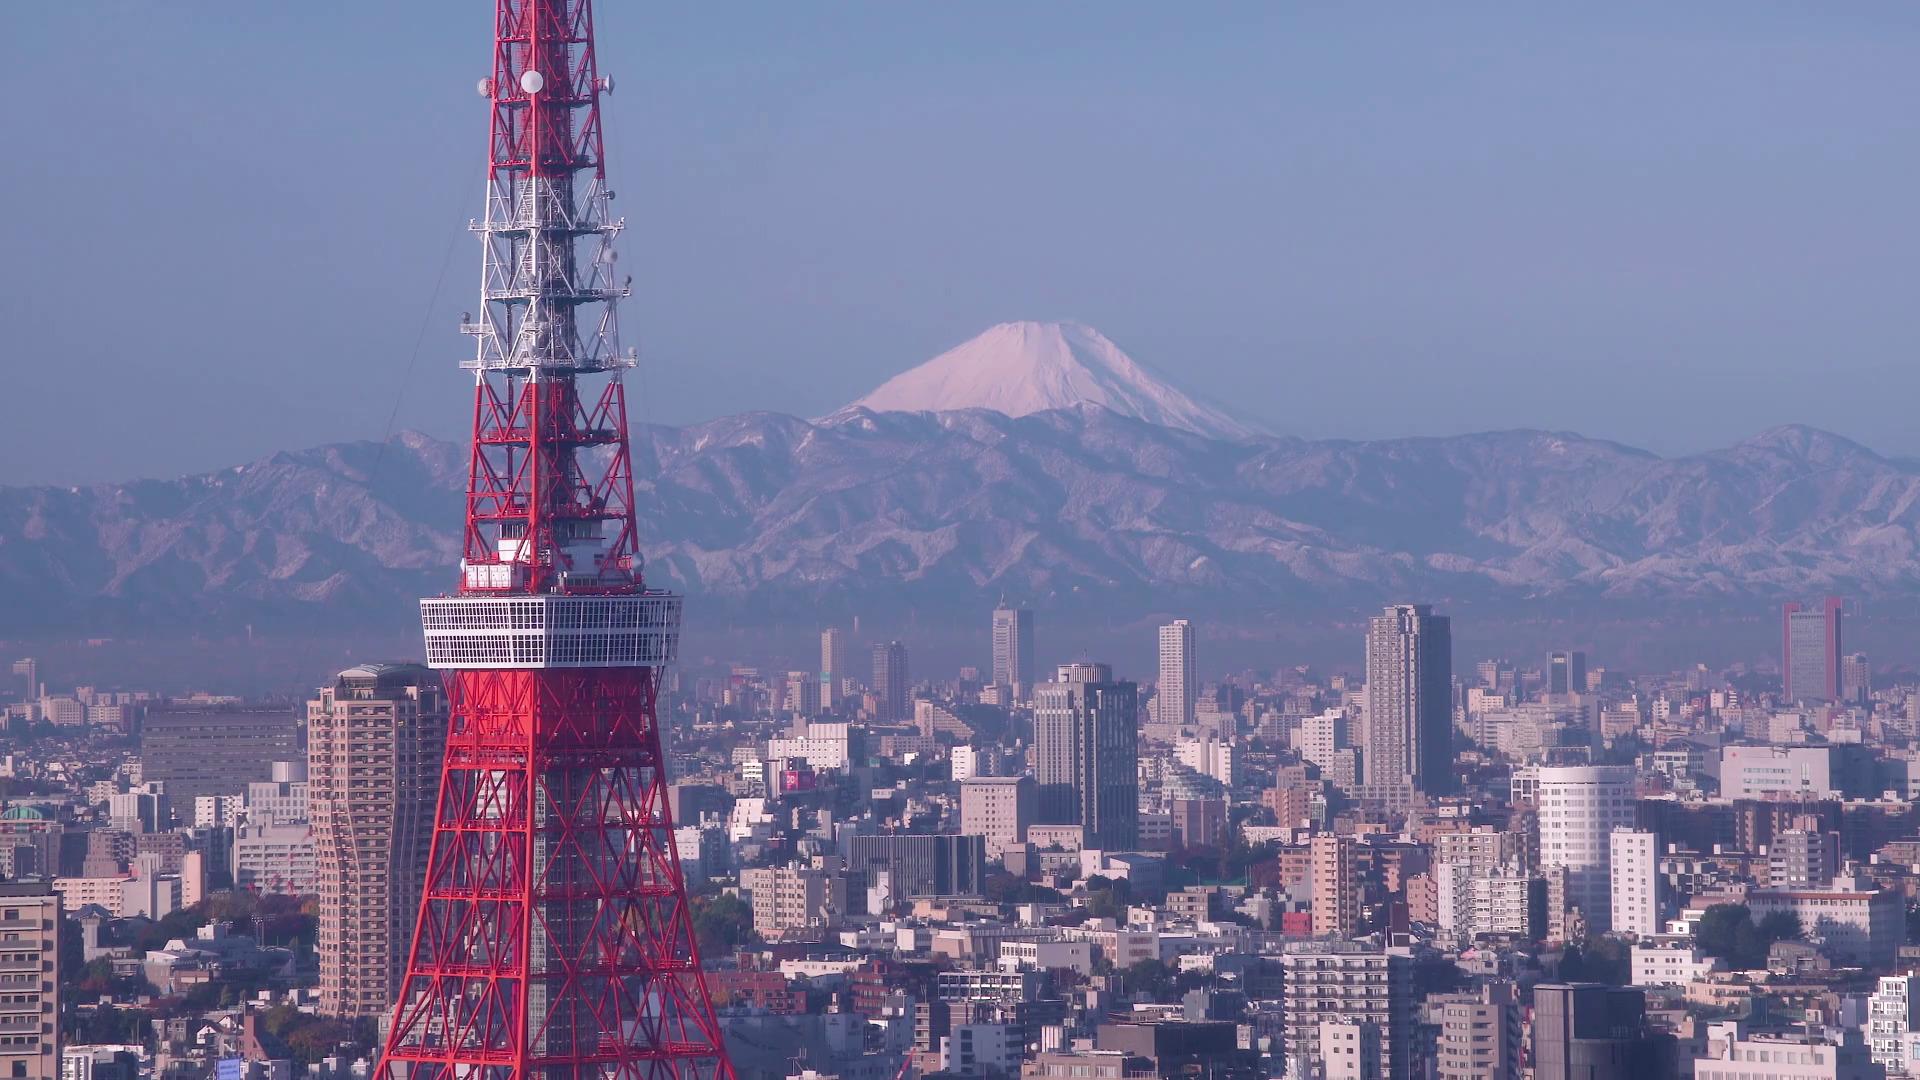 Japan, Tokyo, city skyline with Tokyo Tower and Mount Fuji beyond ...